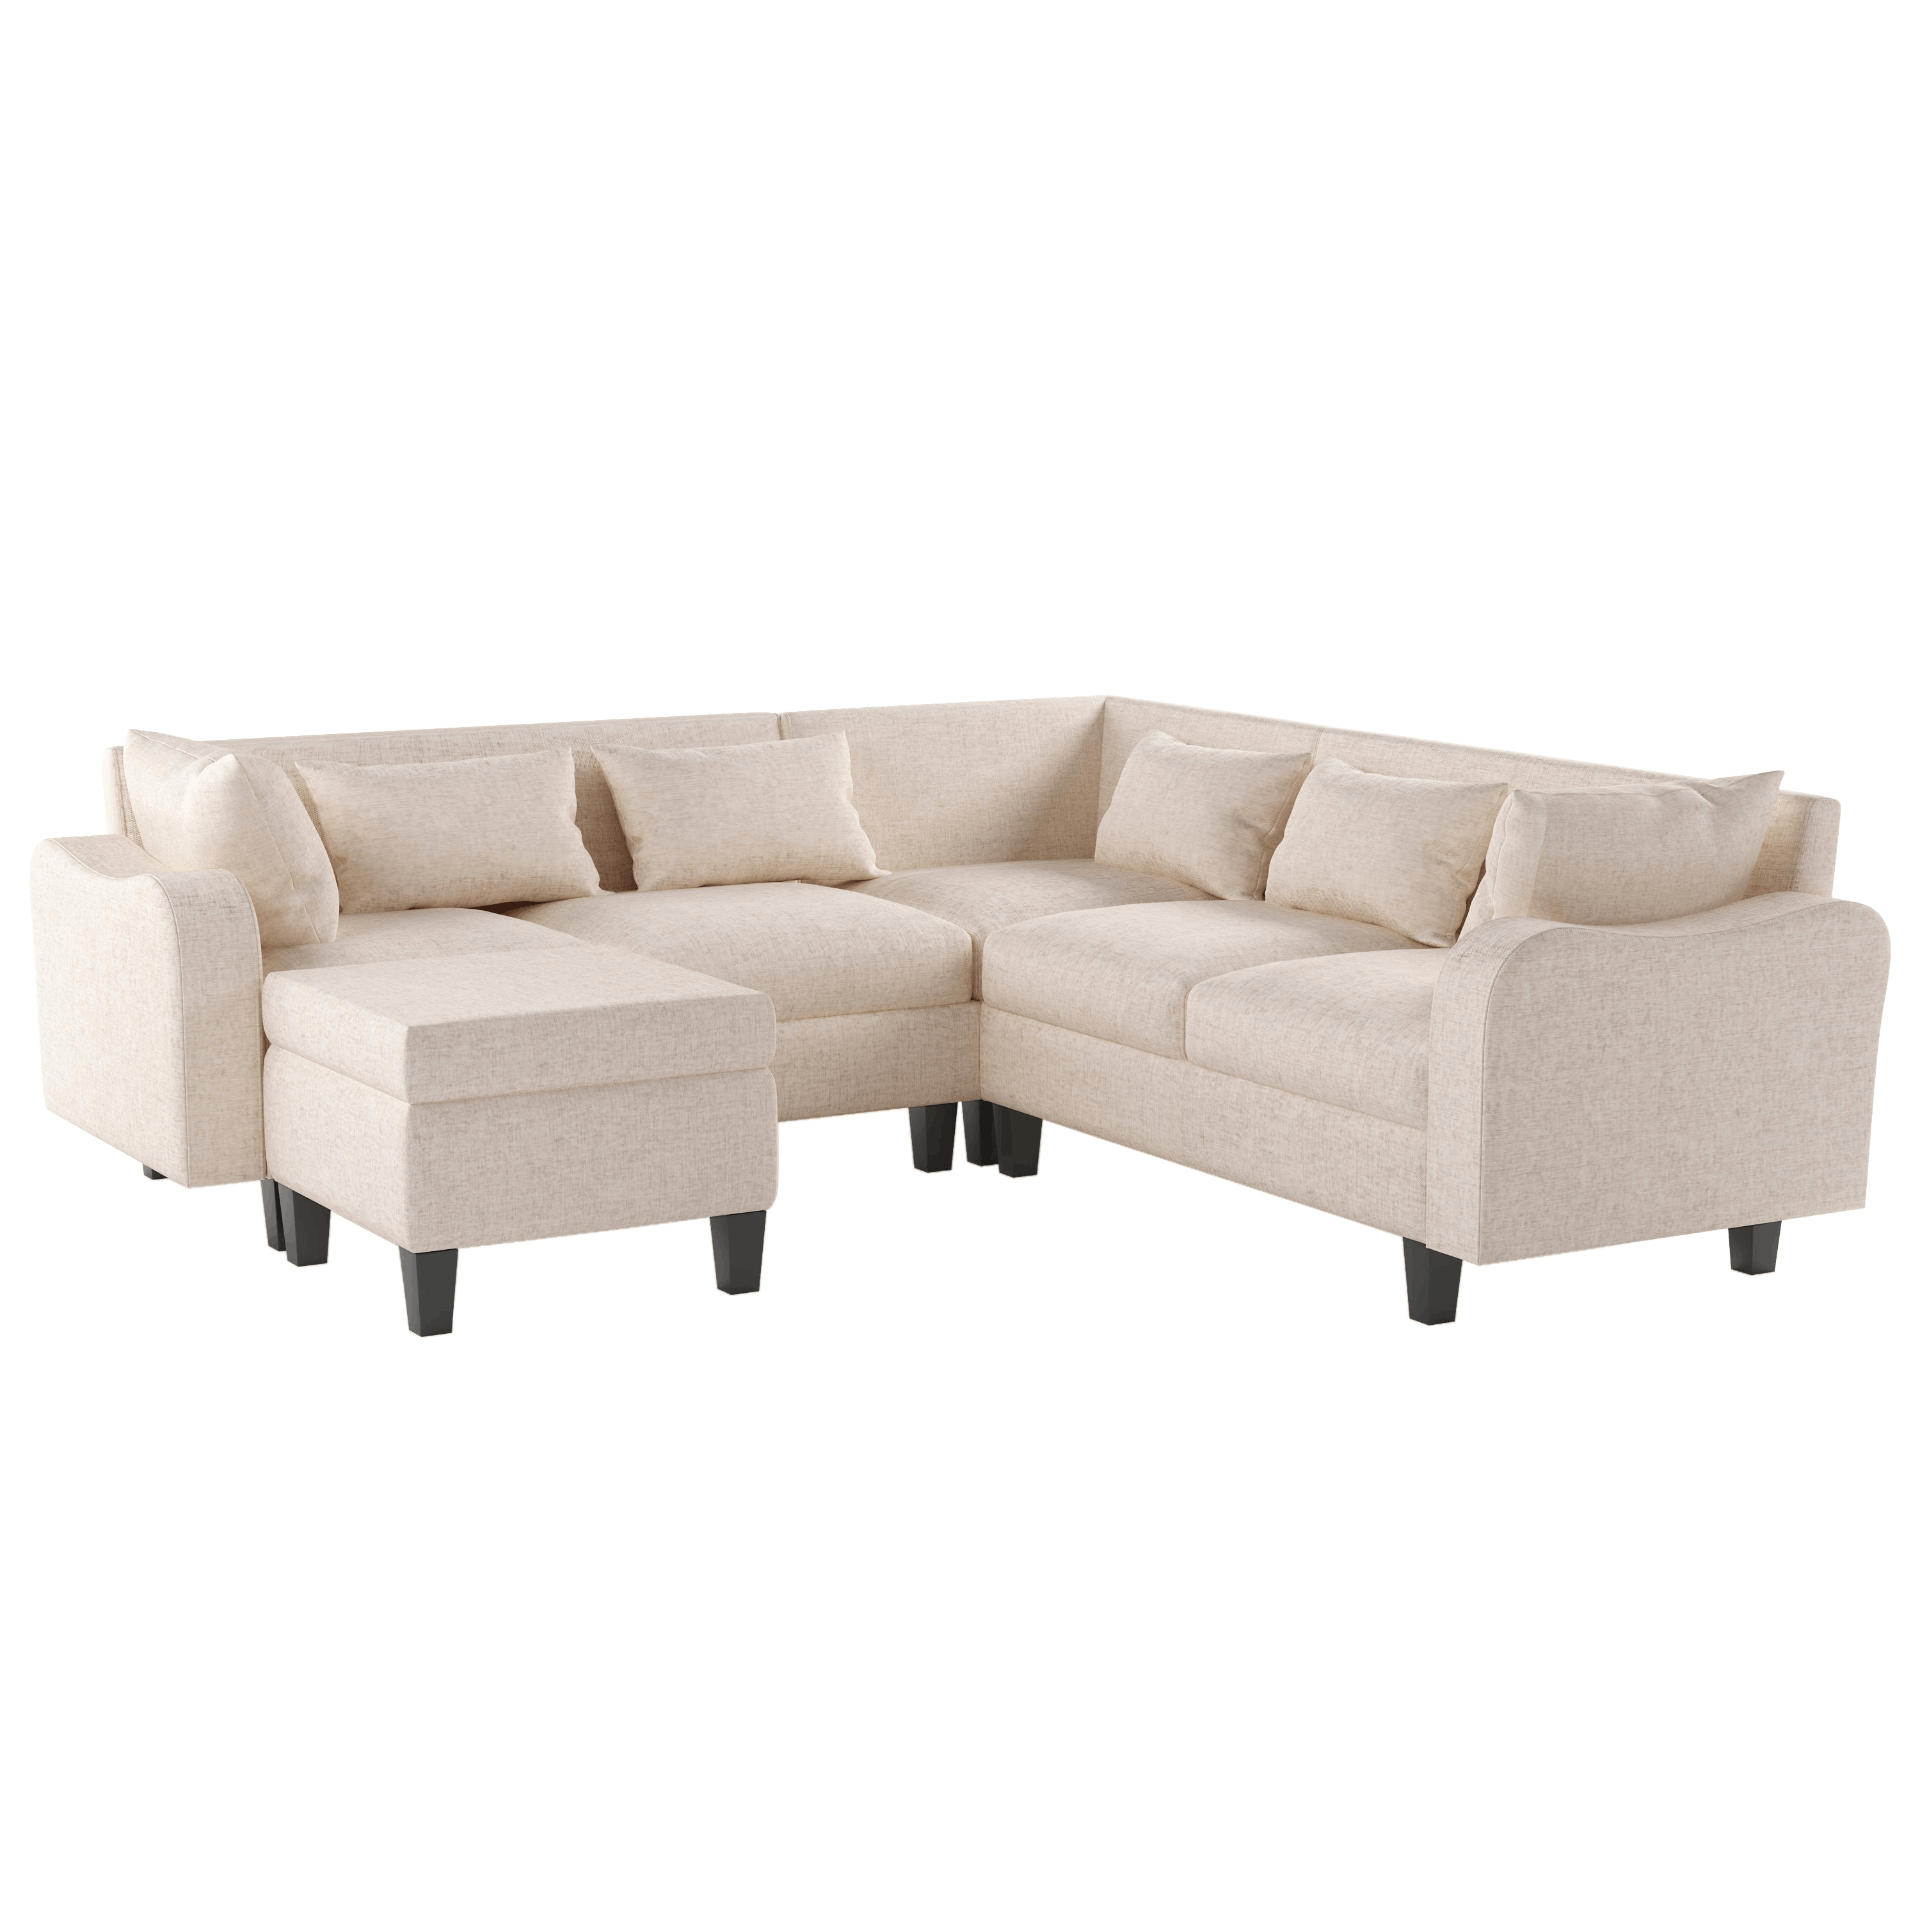 87" Modern Sectional Sofa with coffee table,6-Seat Couch Set with Storage Ottoman,Various Combinations,L-Shape Indoor Furniture with Unique Armrests for Living Room,Apartment, 2 Colors(6 pillows) 